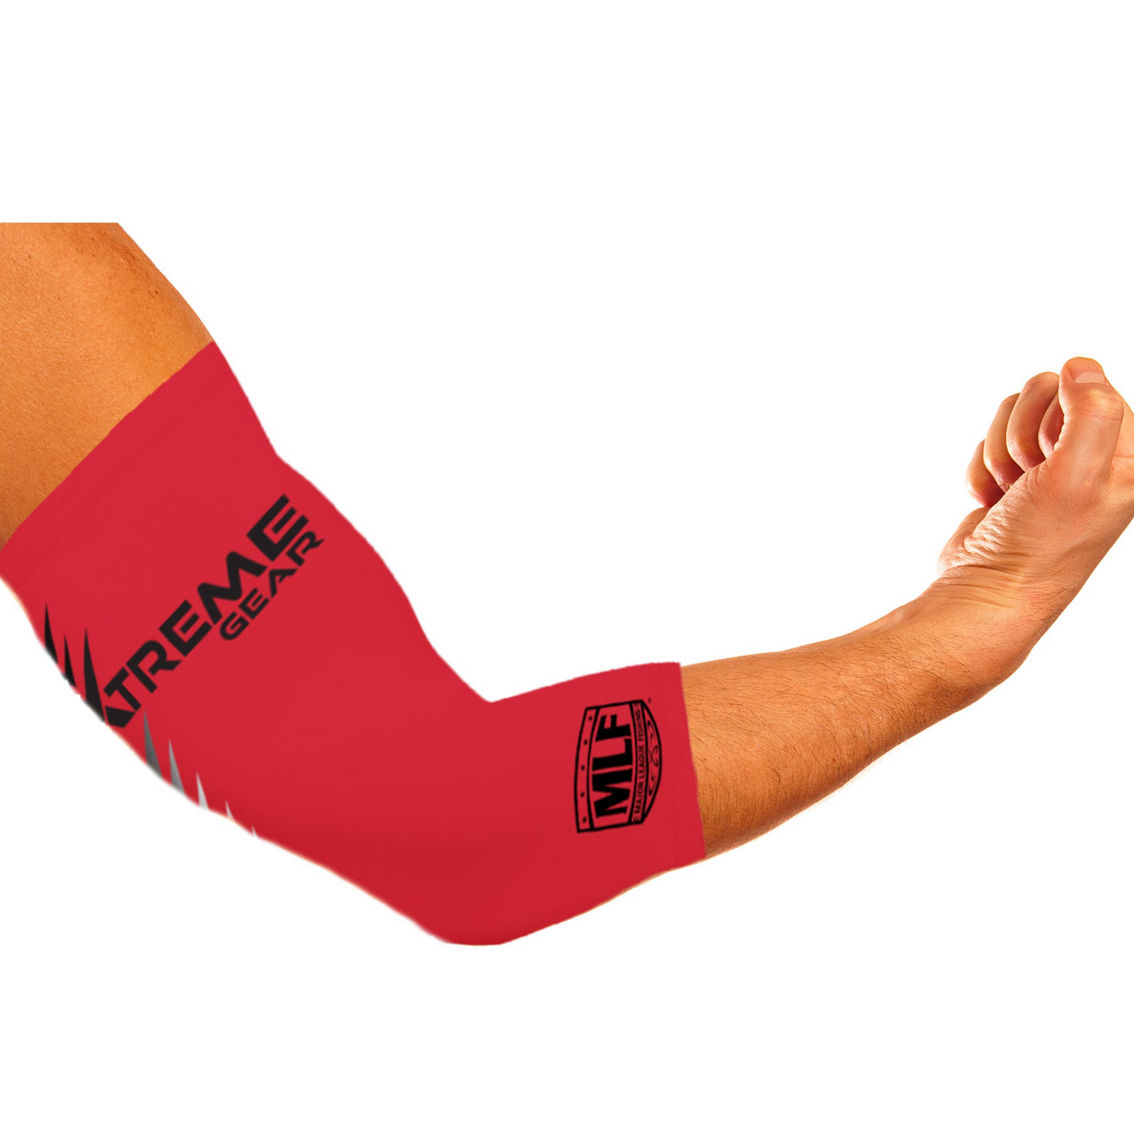 Xtreme Gear Compression Elbow Sleeve - Image 2 of 2